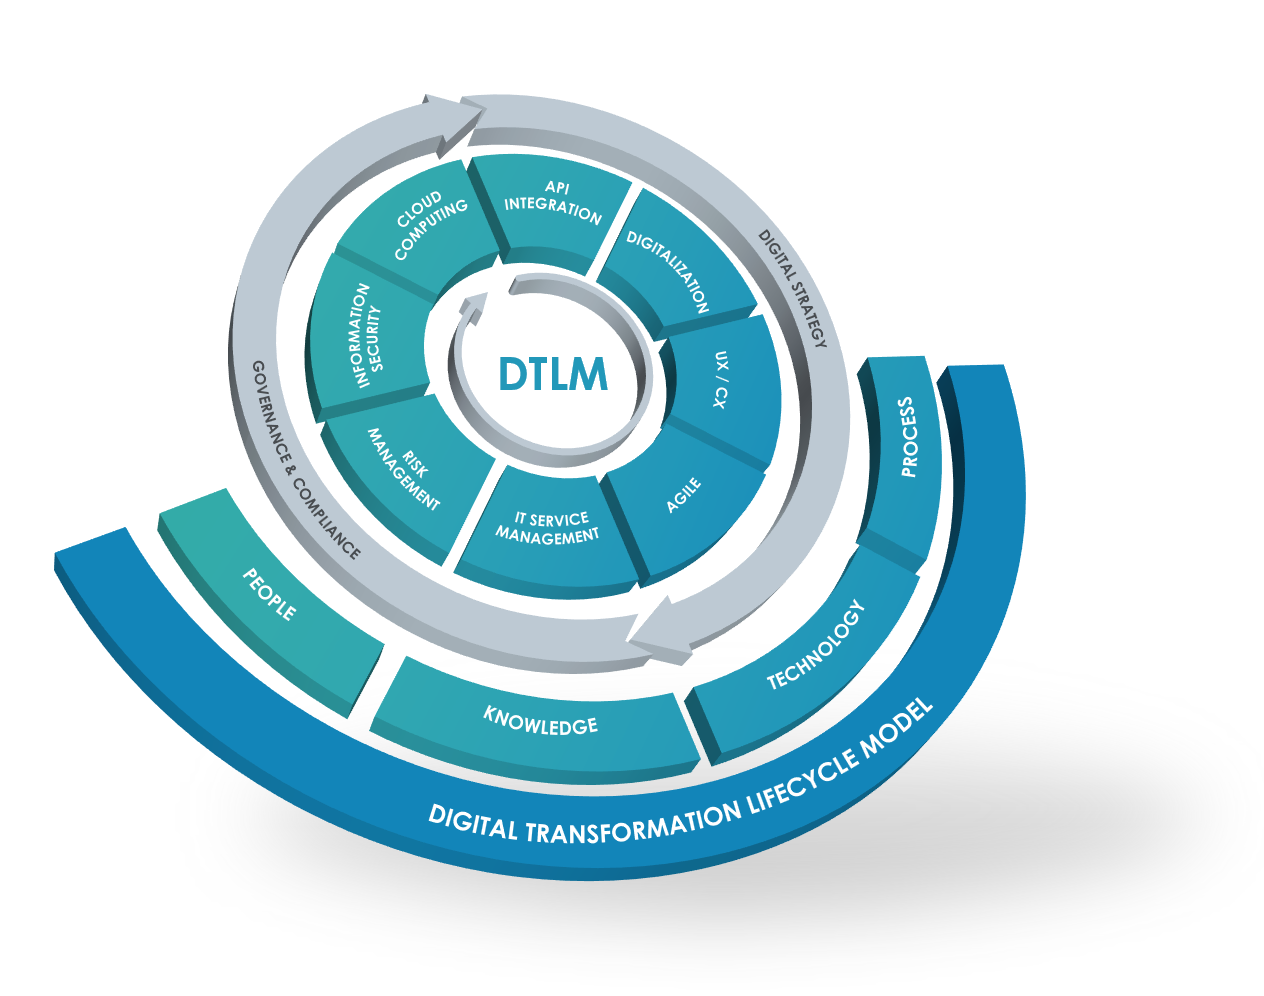 Our methodology (DTLM)